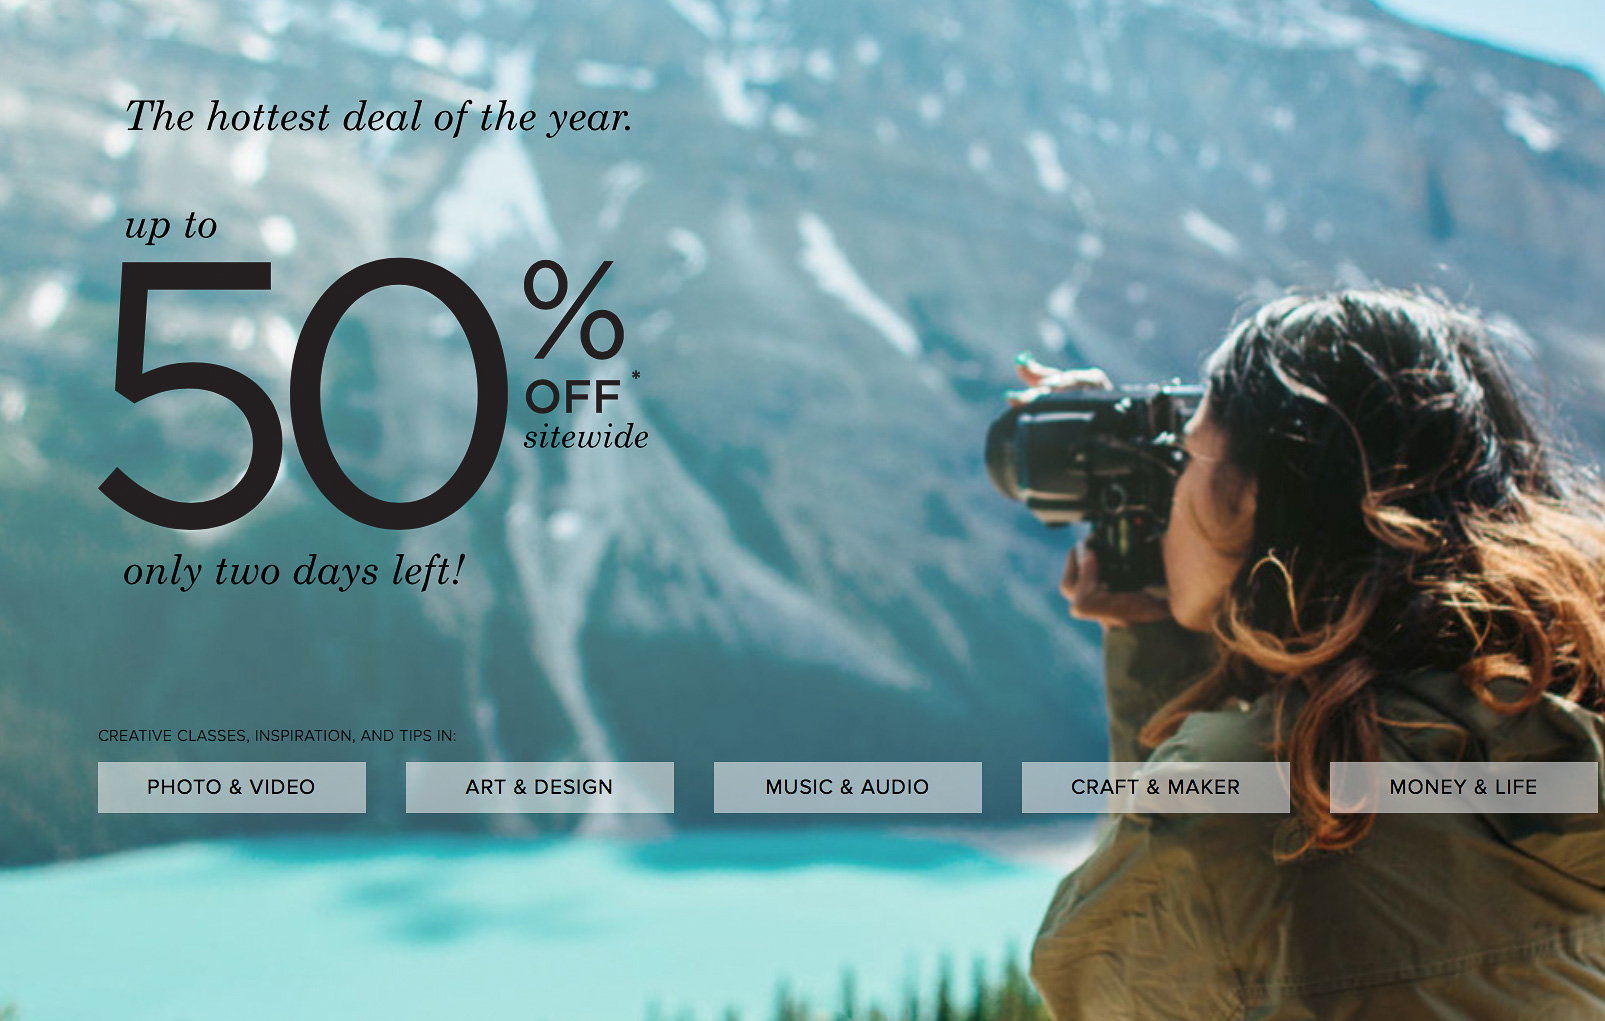 Last Chance For Up To 50% CreativeLive Site-Wide, Including Their Fast Start Video Guides